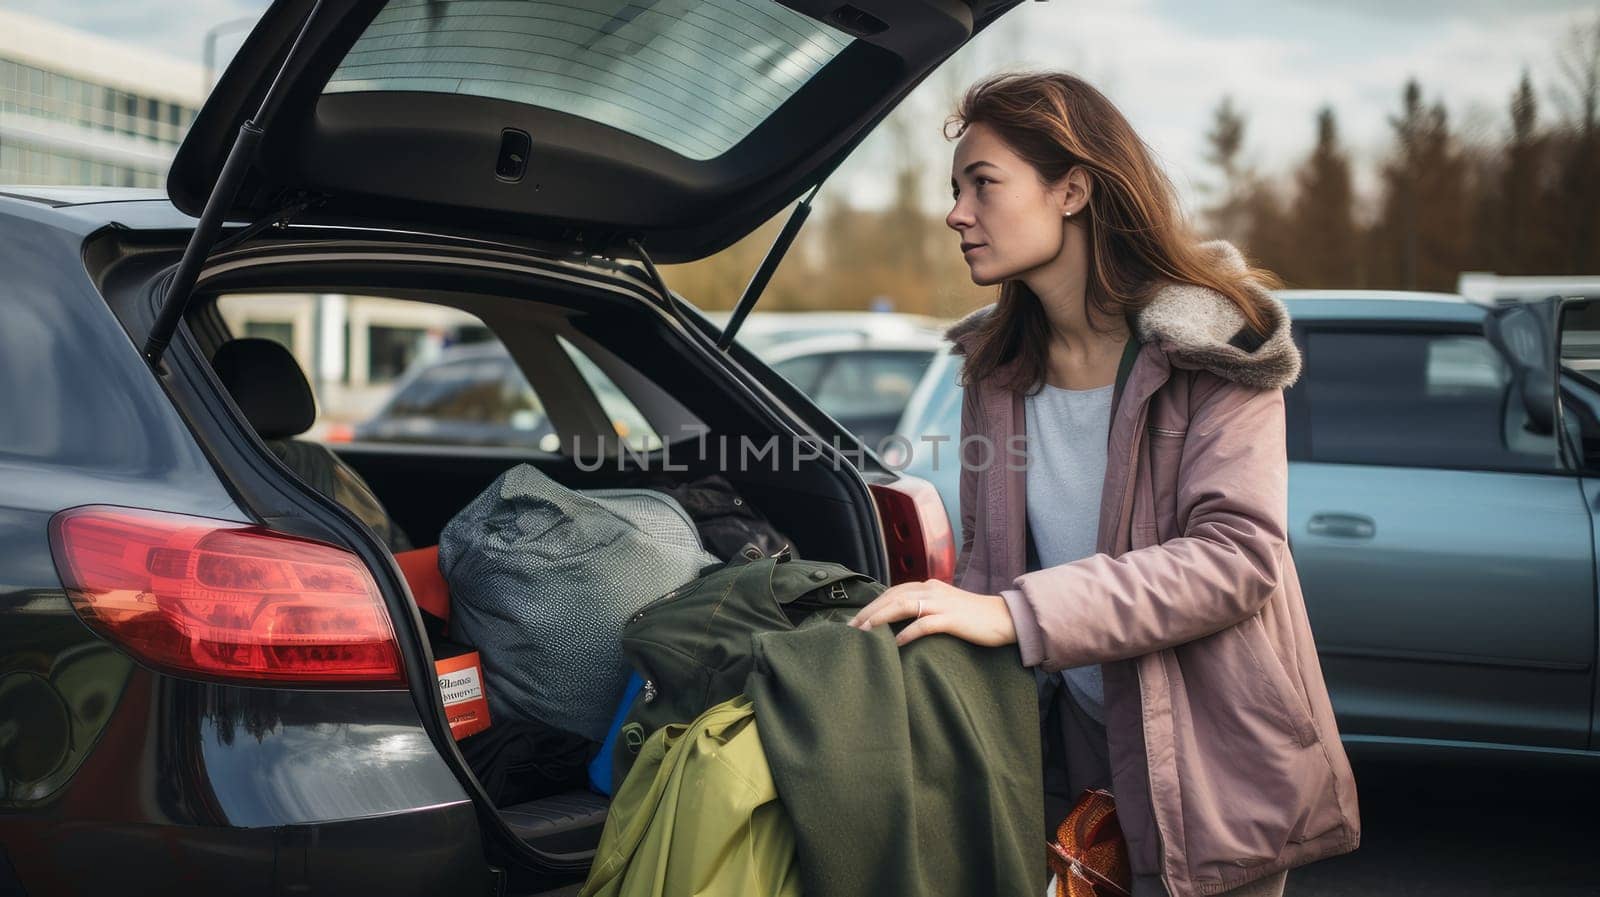 A black woman places a large amount of shopping in the trunk of her car in a shopping center parking lot on Black Friday sales day. by Alla_Yurtayeva